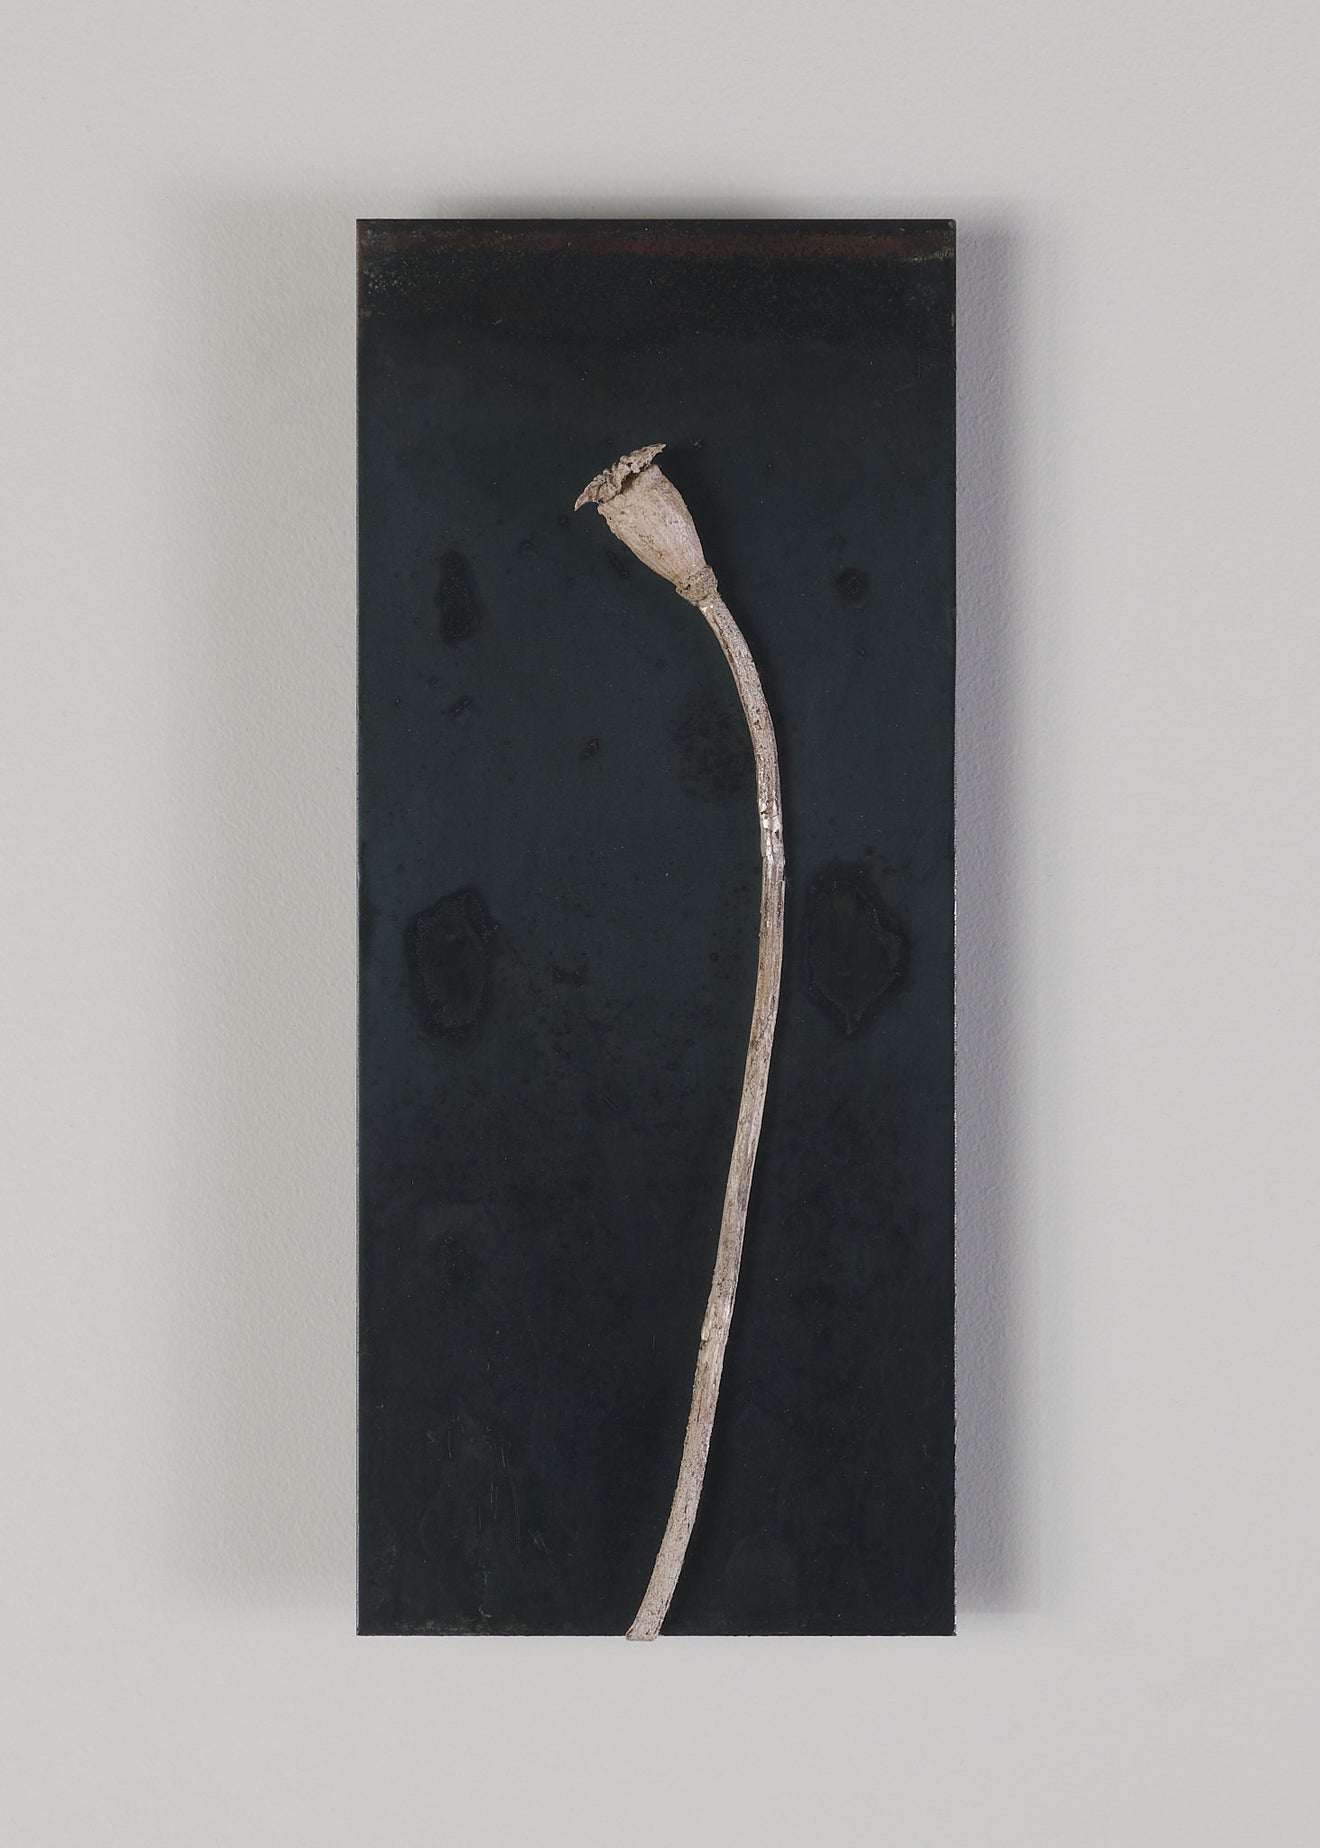 WALL PIECE WITH POPPY, AN HOMAGE TO ANSELM KEIFFER BY DIANE TINTOR